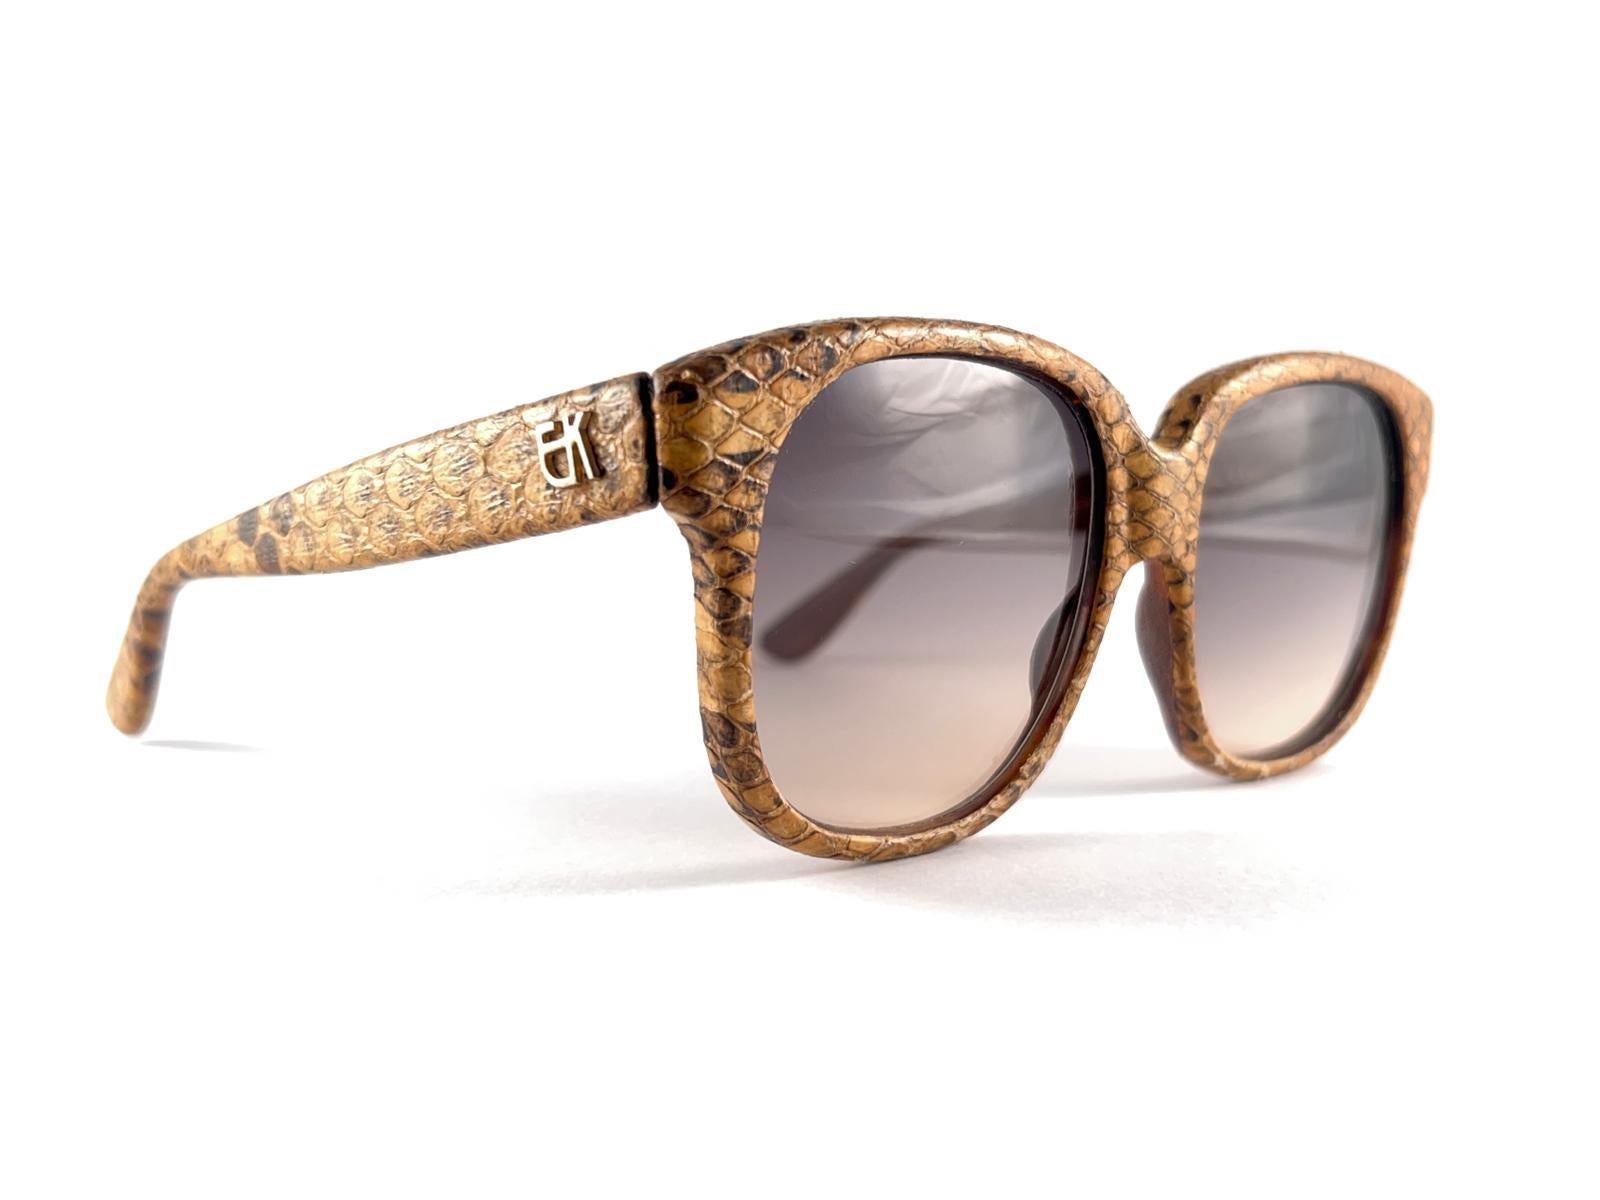 
Classy And Eye Catching Vintage Emmanuelle Khanh Paris.
Strong And Stunning Frame. A Must Have Piece! 
This Pair Is A Class Statement, A Must Have For A Collector! A Great Opportunity To Achieve A Unique And Yet Timeless Look.
Please Notice This